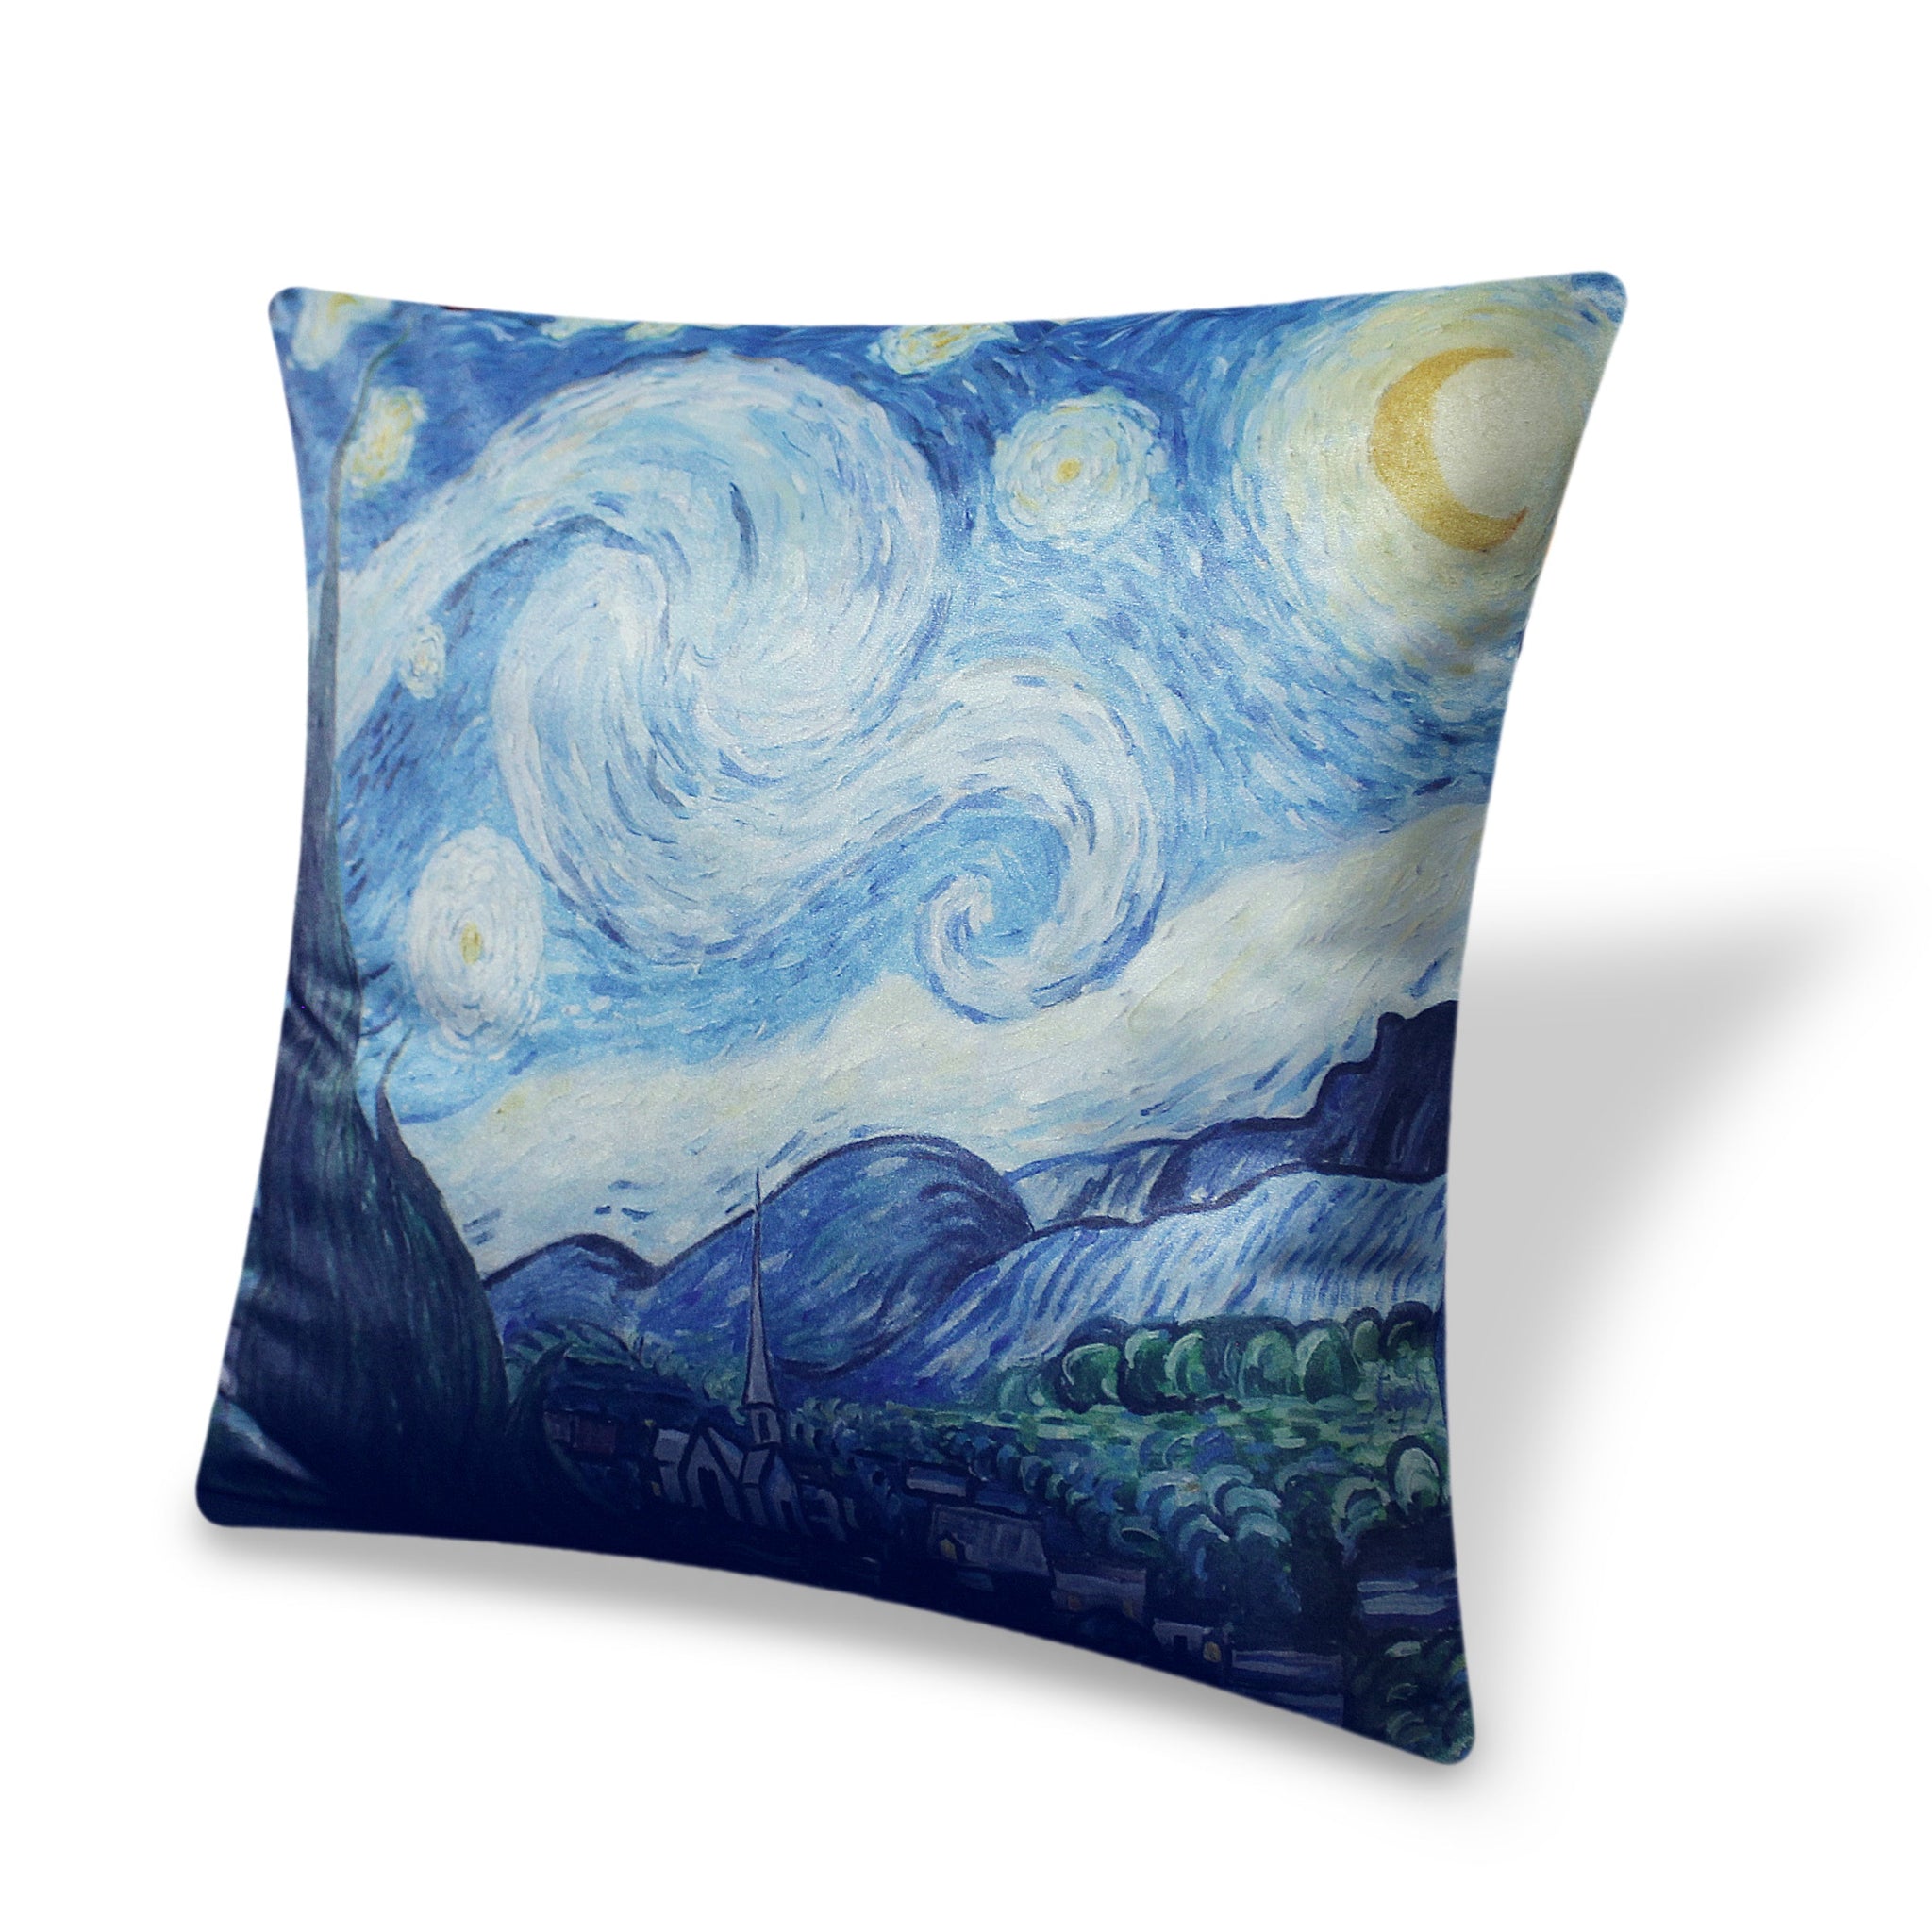 Blue Velvet Cushion Cover Vincent Van Gogh's Starry Night Paint Decorative Pillow Cover Home Decor Throw Pillow for Sofa Chair 45x45 cm 18x18 In